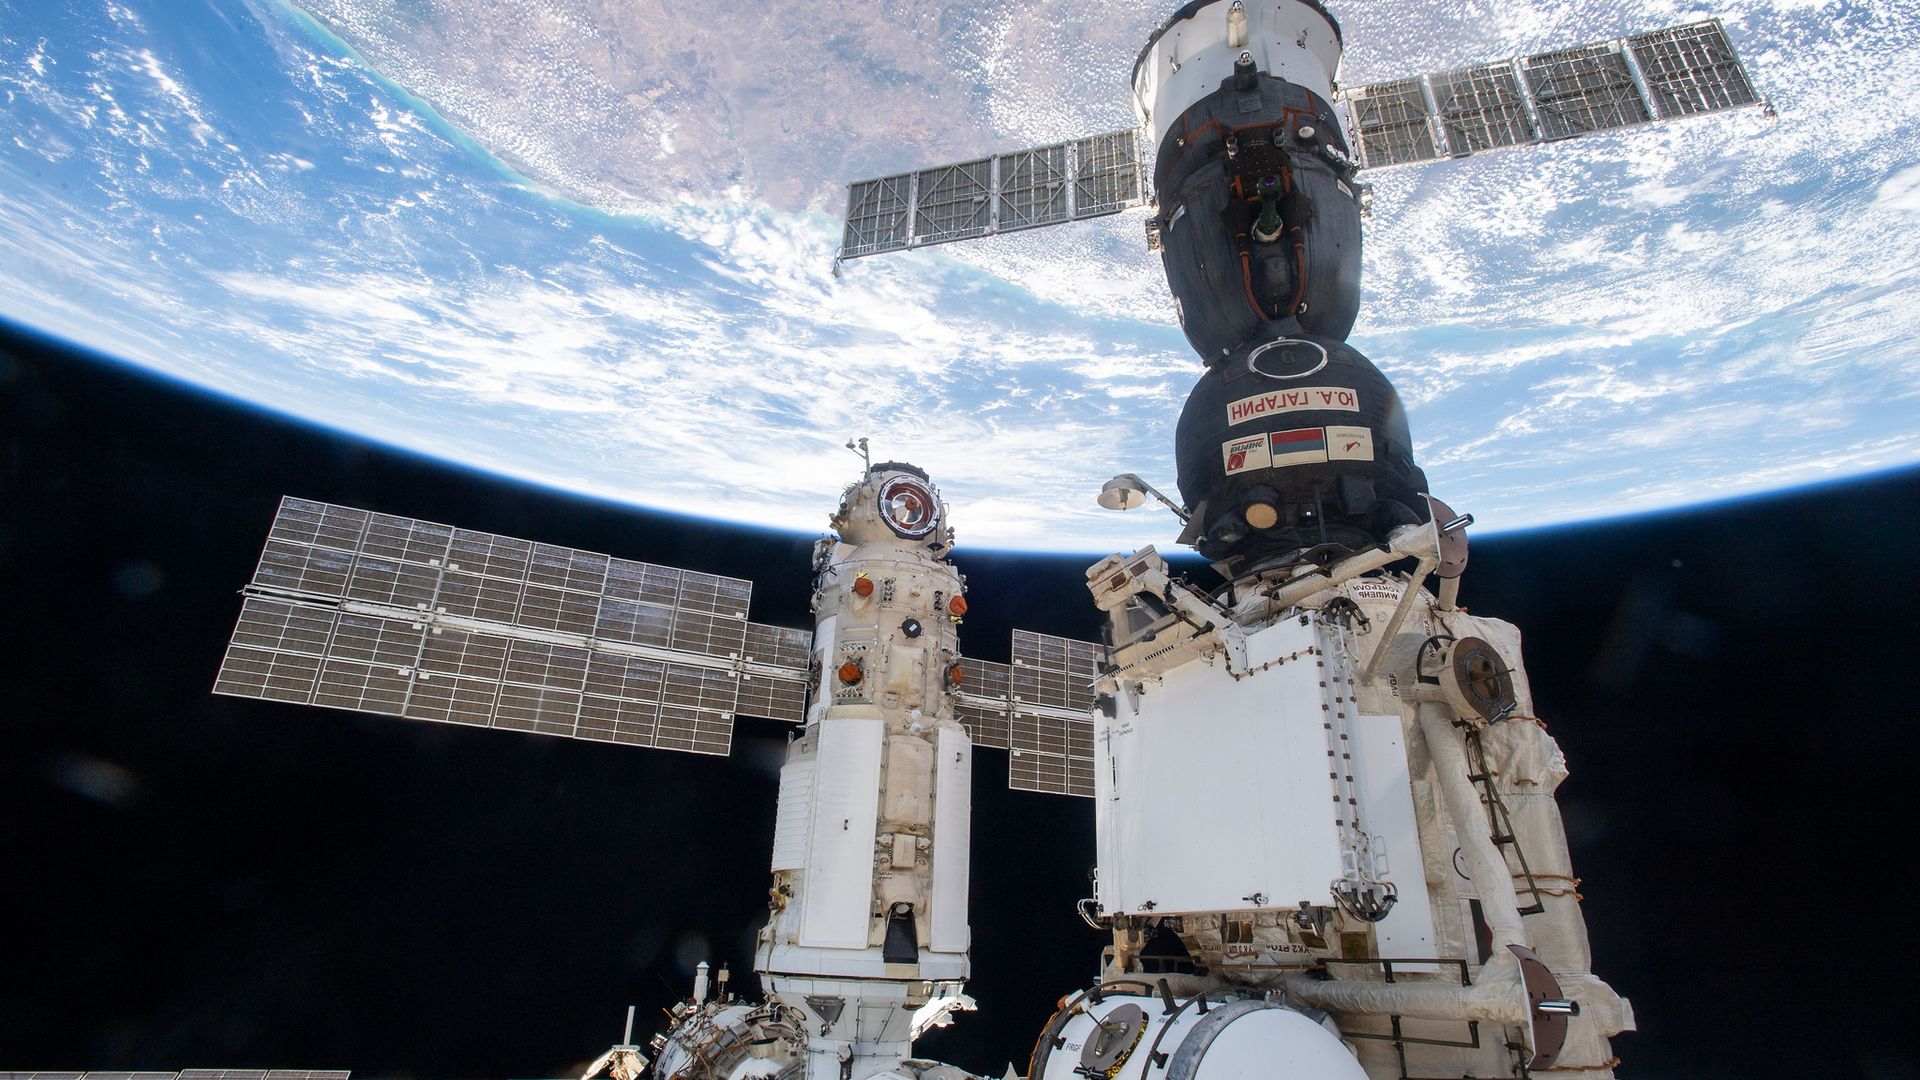 Russia's Nauka module docked to the International Space Station with Earth in the background